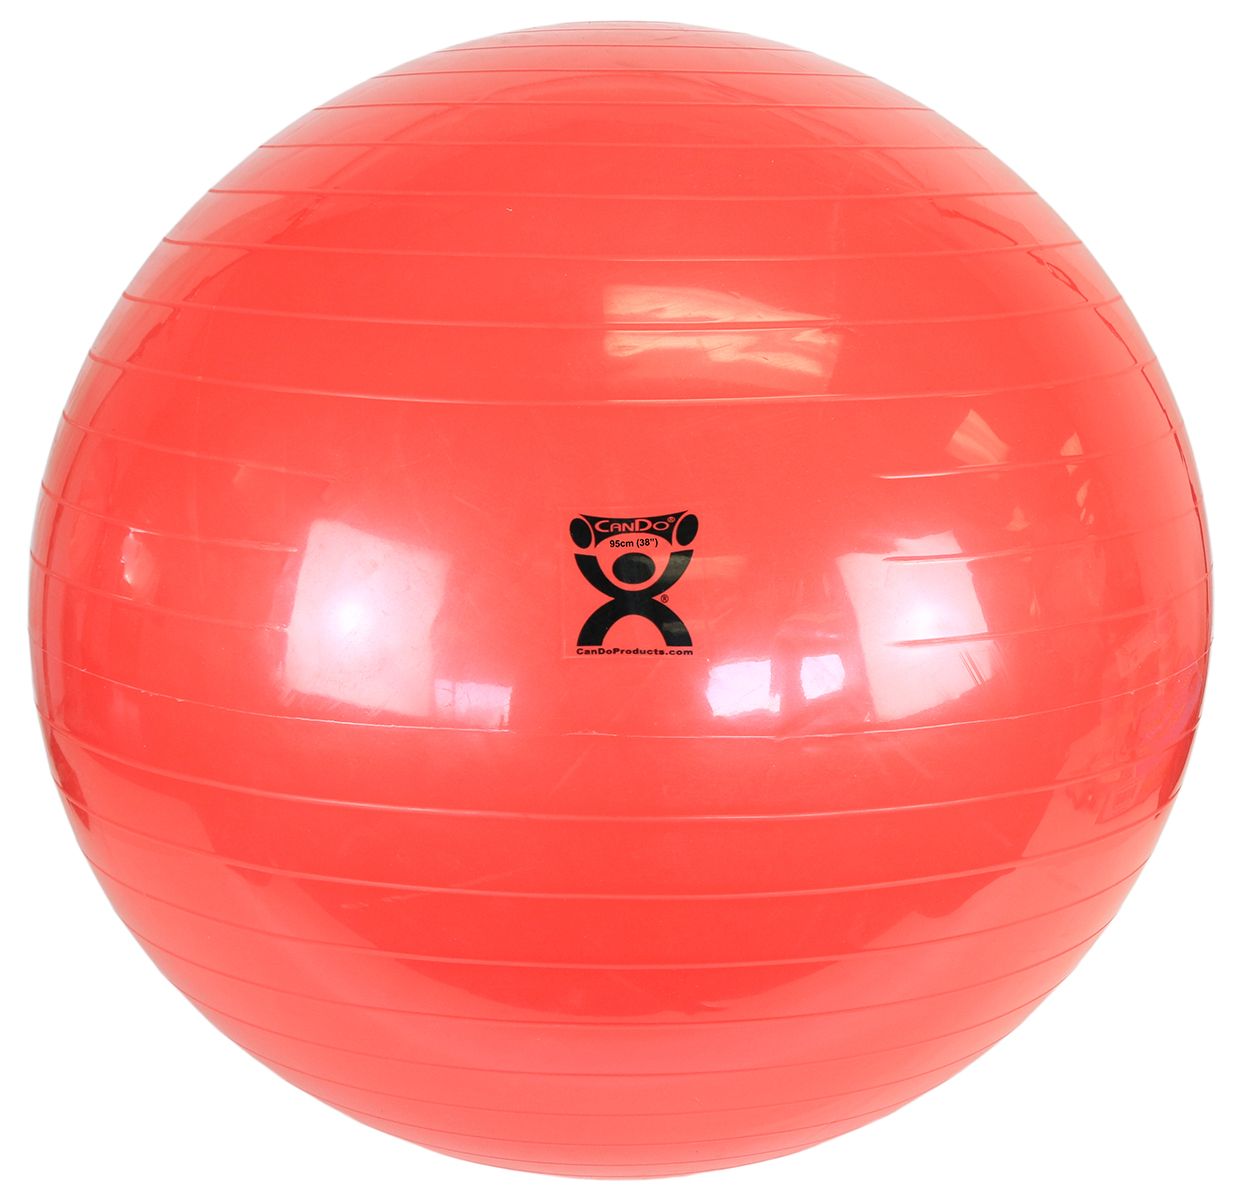 Cando Inflatable Exercise Ball - Red - 38" (95 cm)